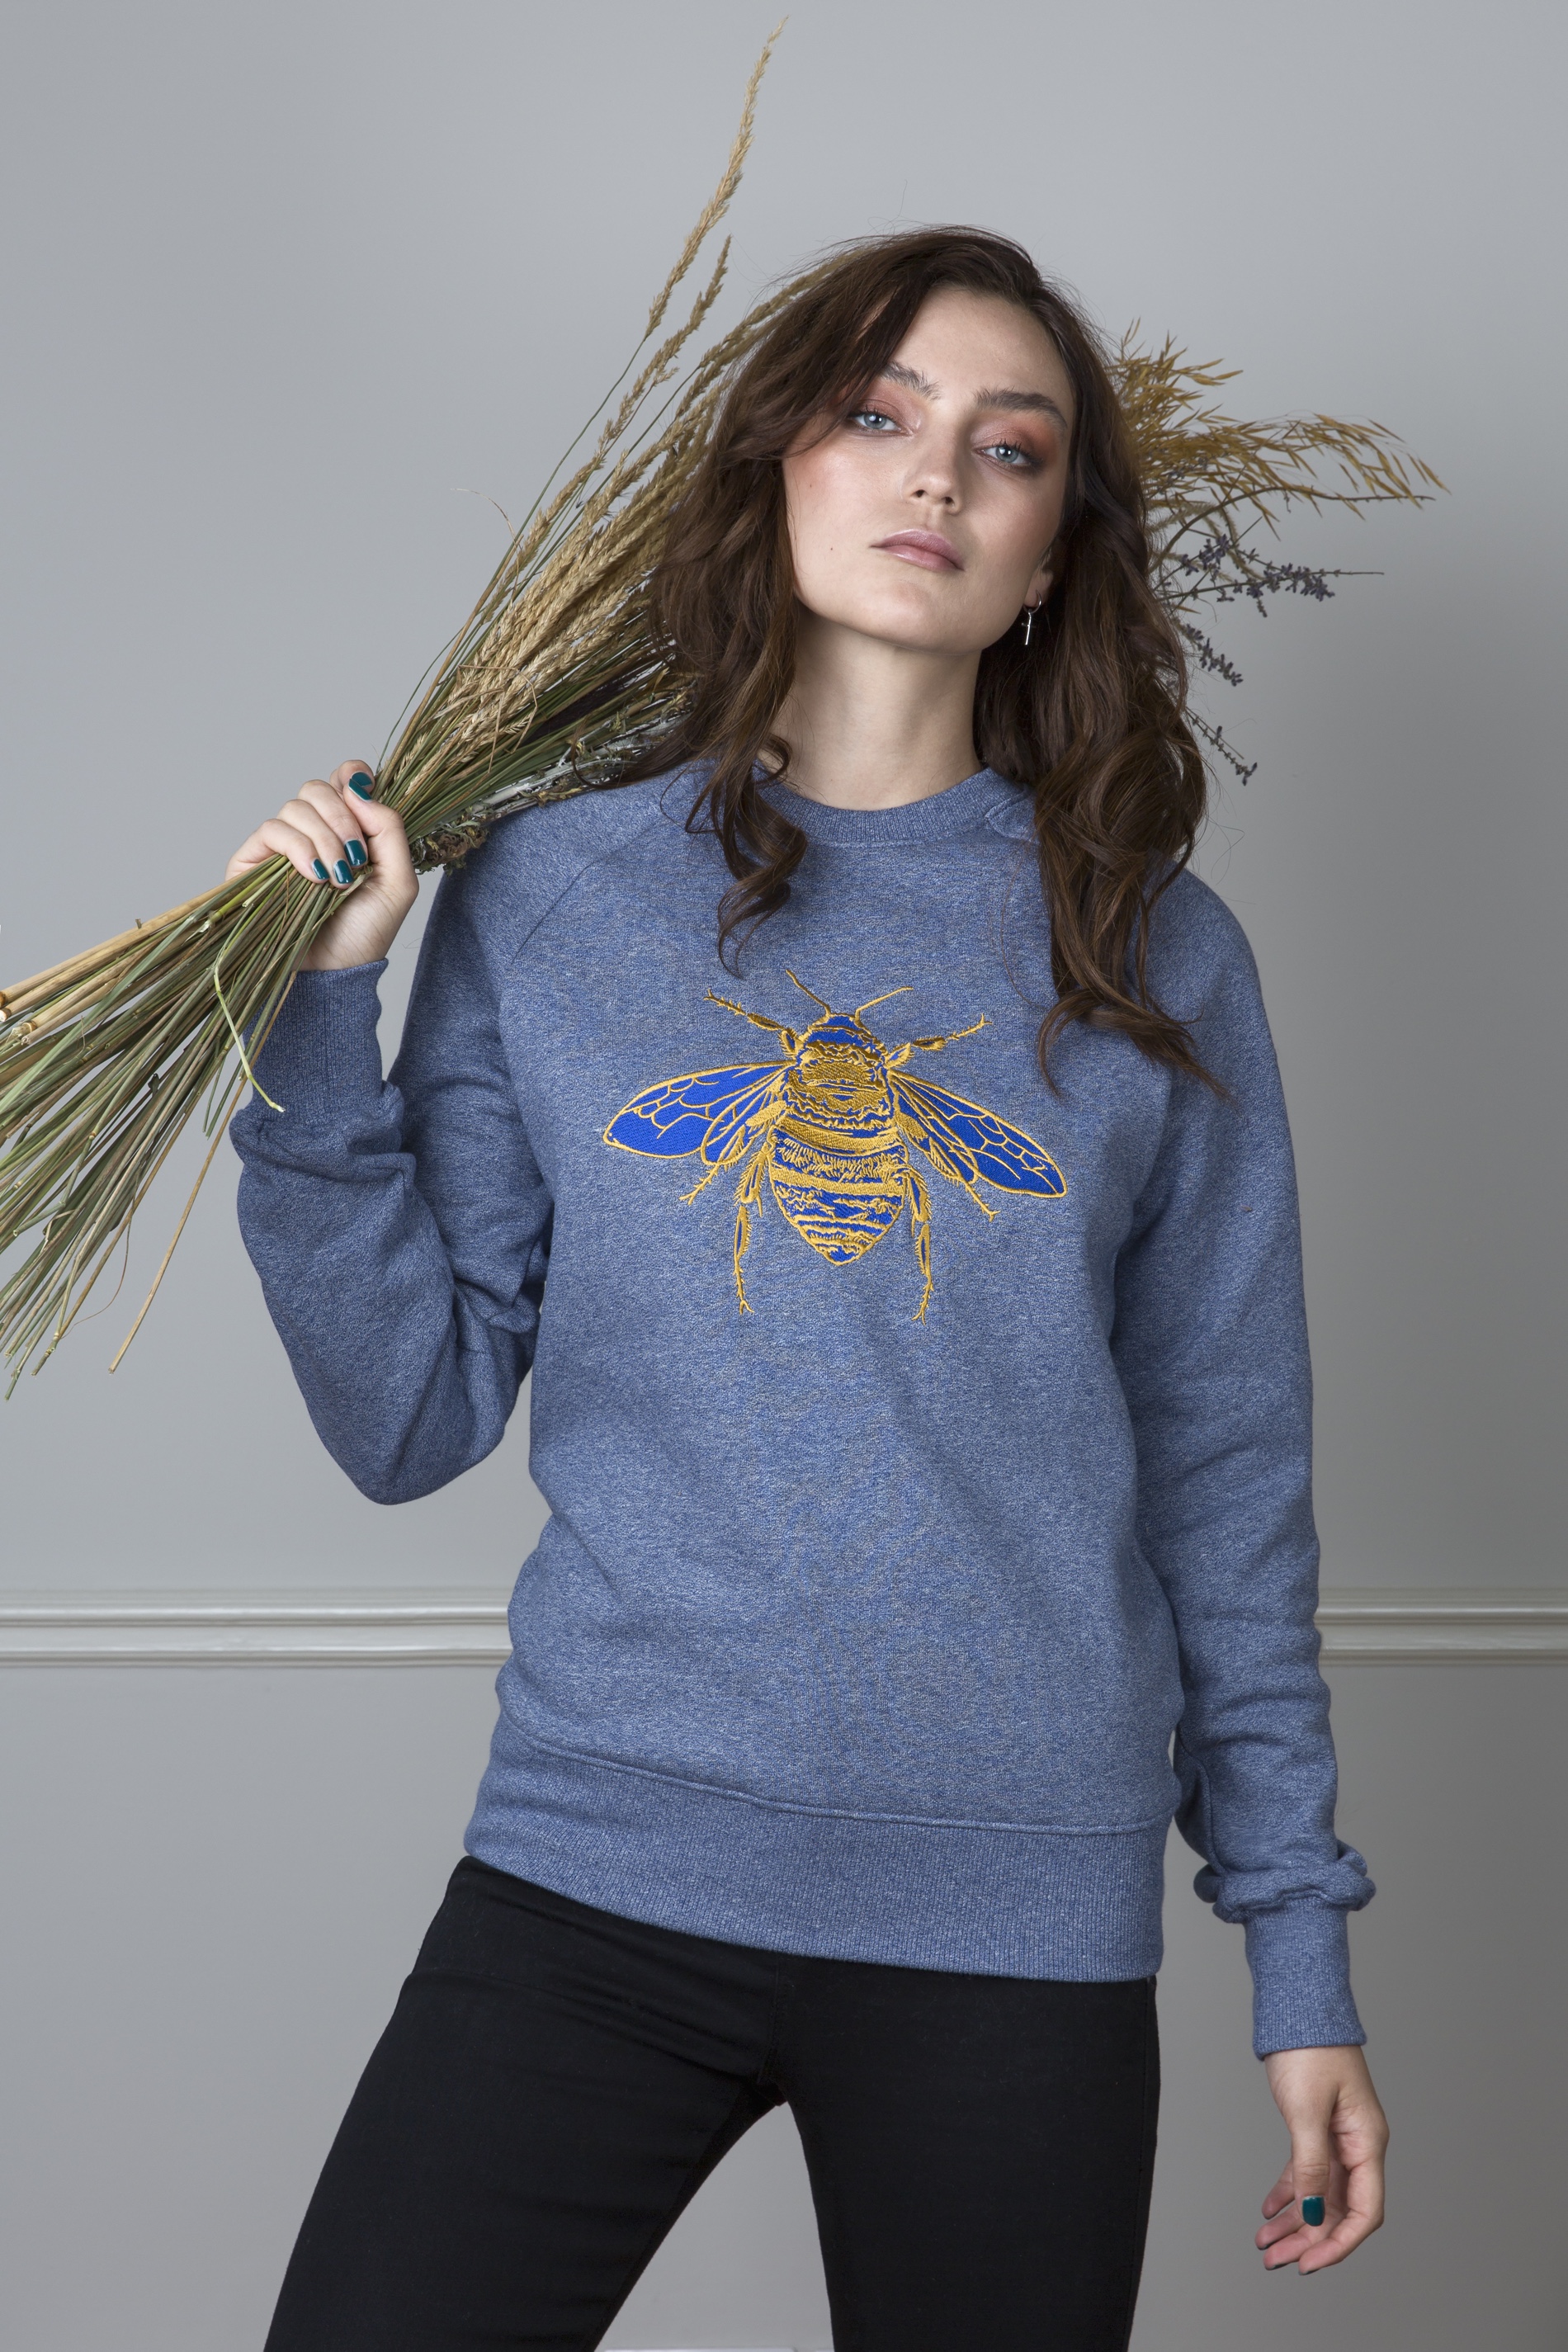 Bee-eautiful sustainable fashion that’s Gung Ho